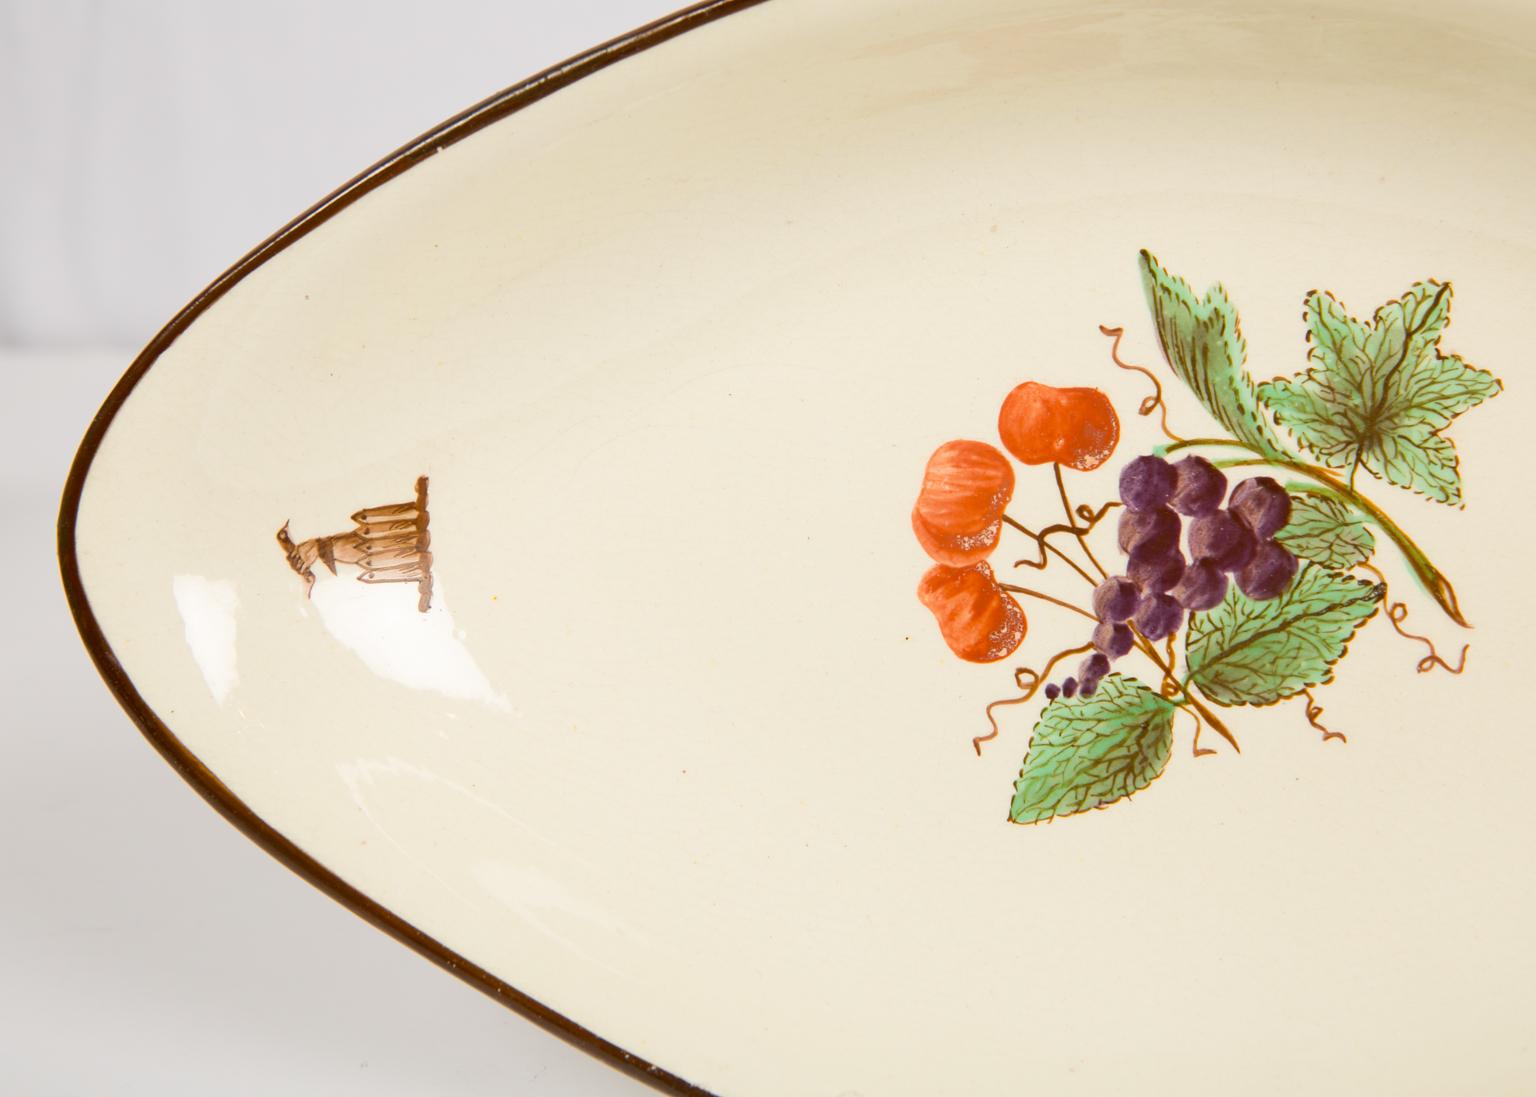 We are pleased to offer this pair of oval-shaped 18th century creamware dishes painted with lively enamels depicting fruits. Made by Turner in the last quarter of the 18th century these sweet dishes show hand-painted fruits in the centre and brown